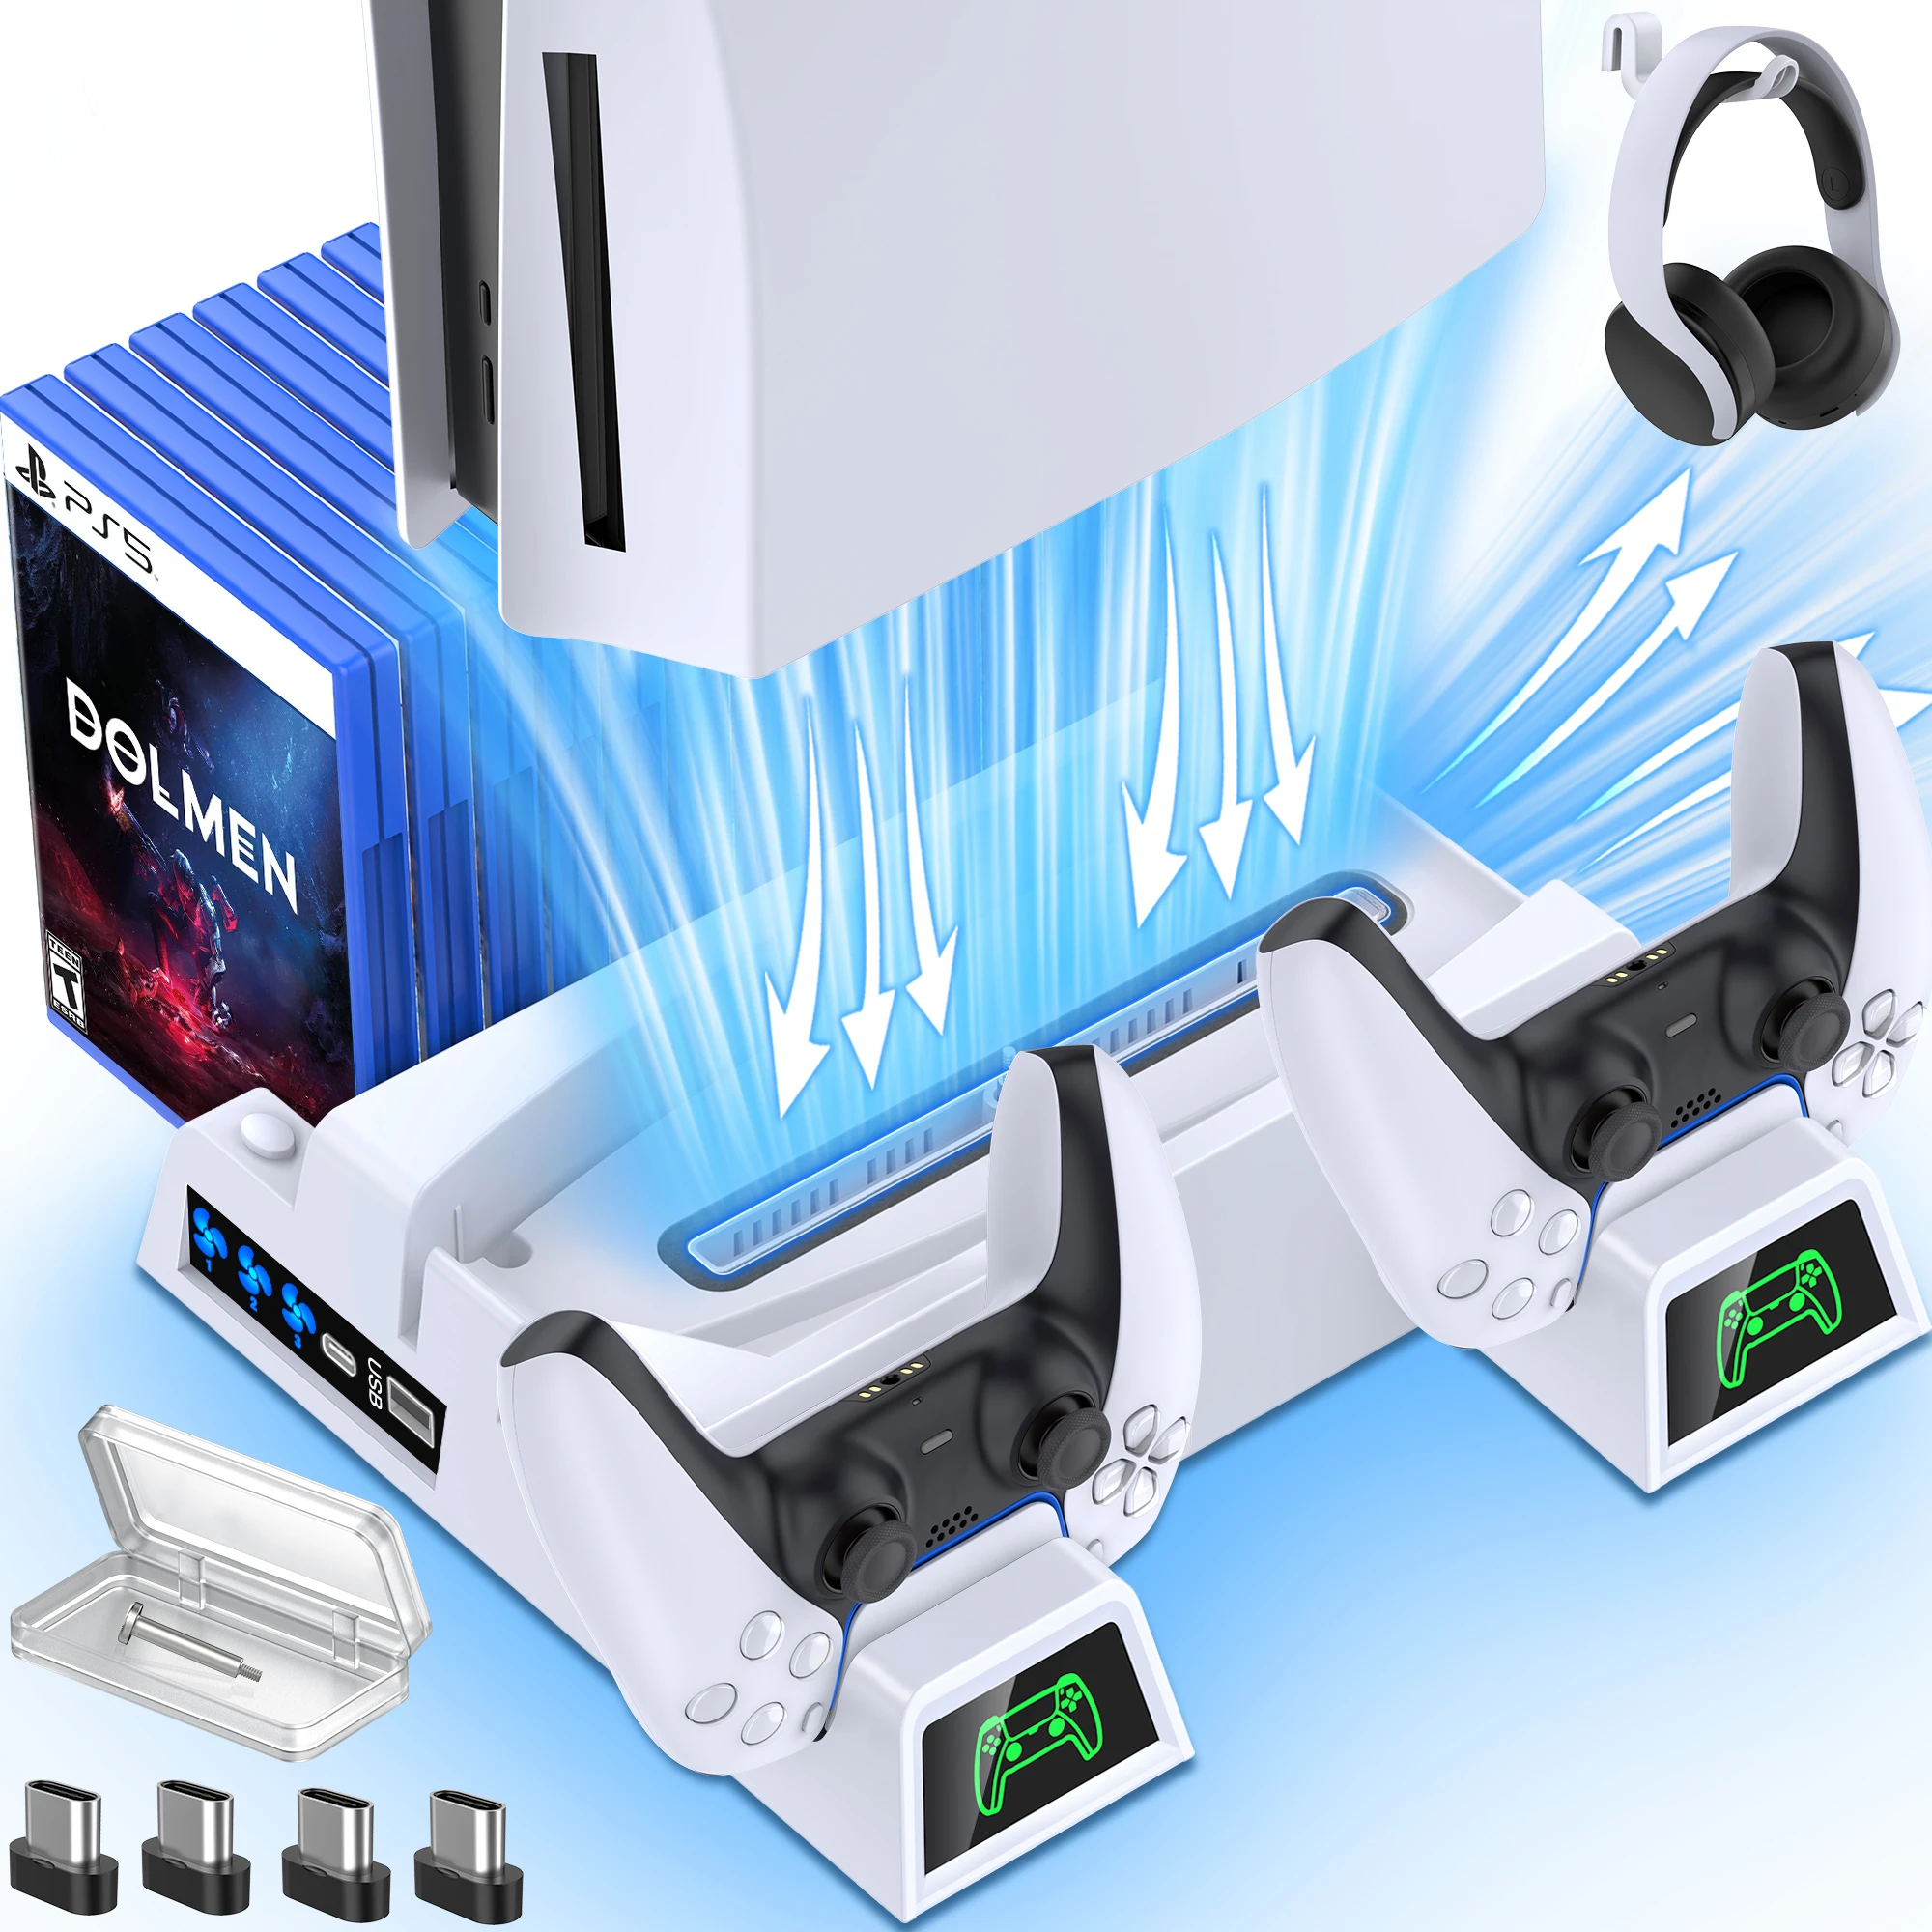 Beboncool Cooling Fan Vertical Stand For Ps5 With 13 Game Slots Dual  Controller Charger Station Dock For Playstation 5 Console - Chargers -  AliExpress